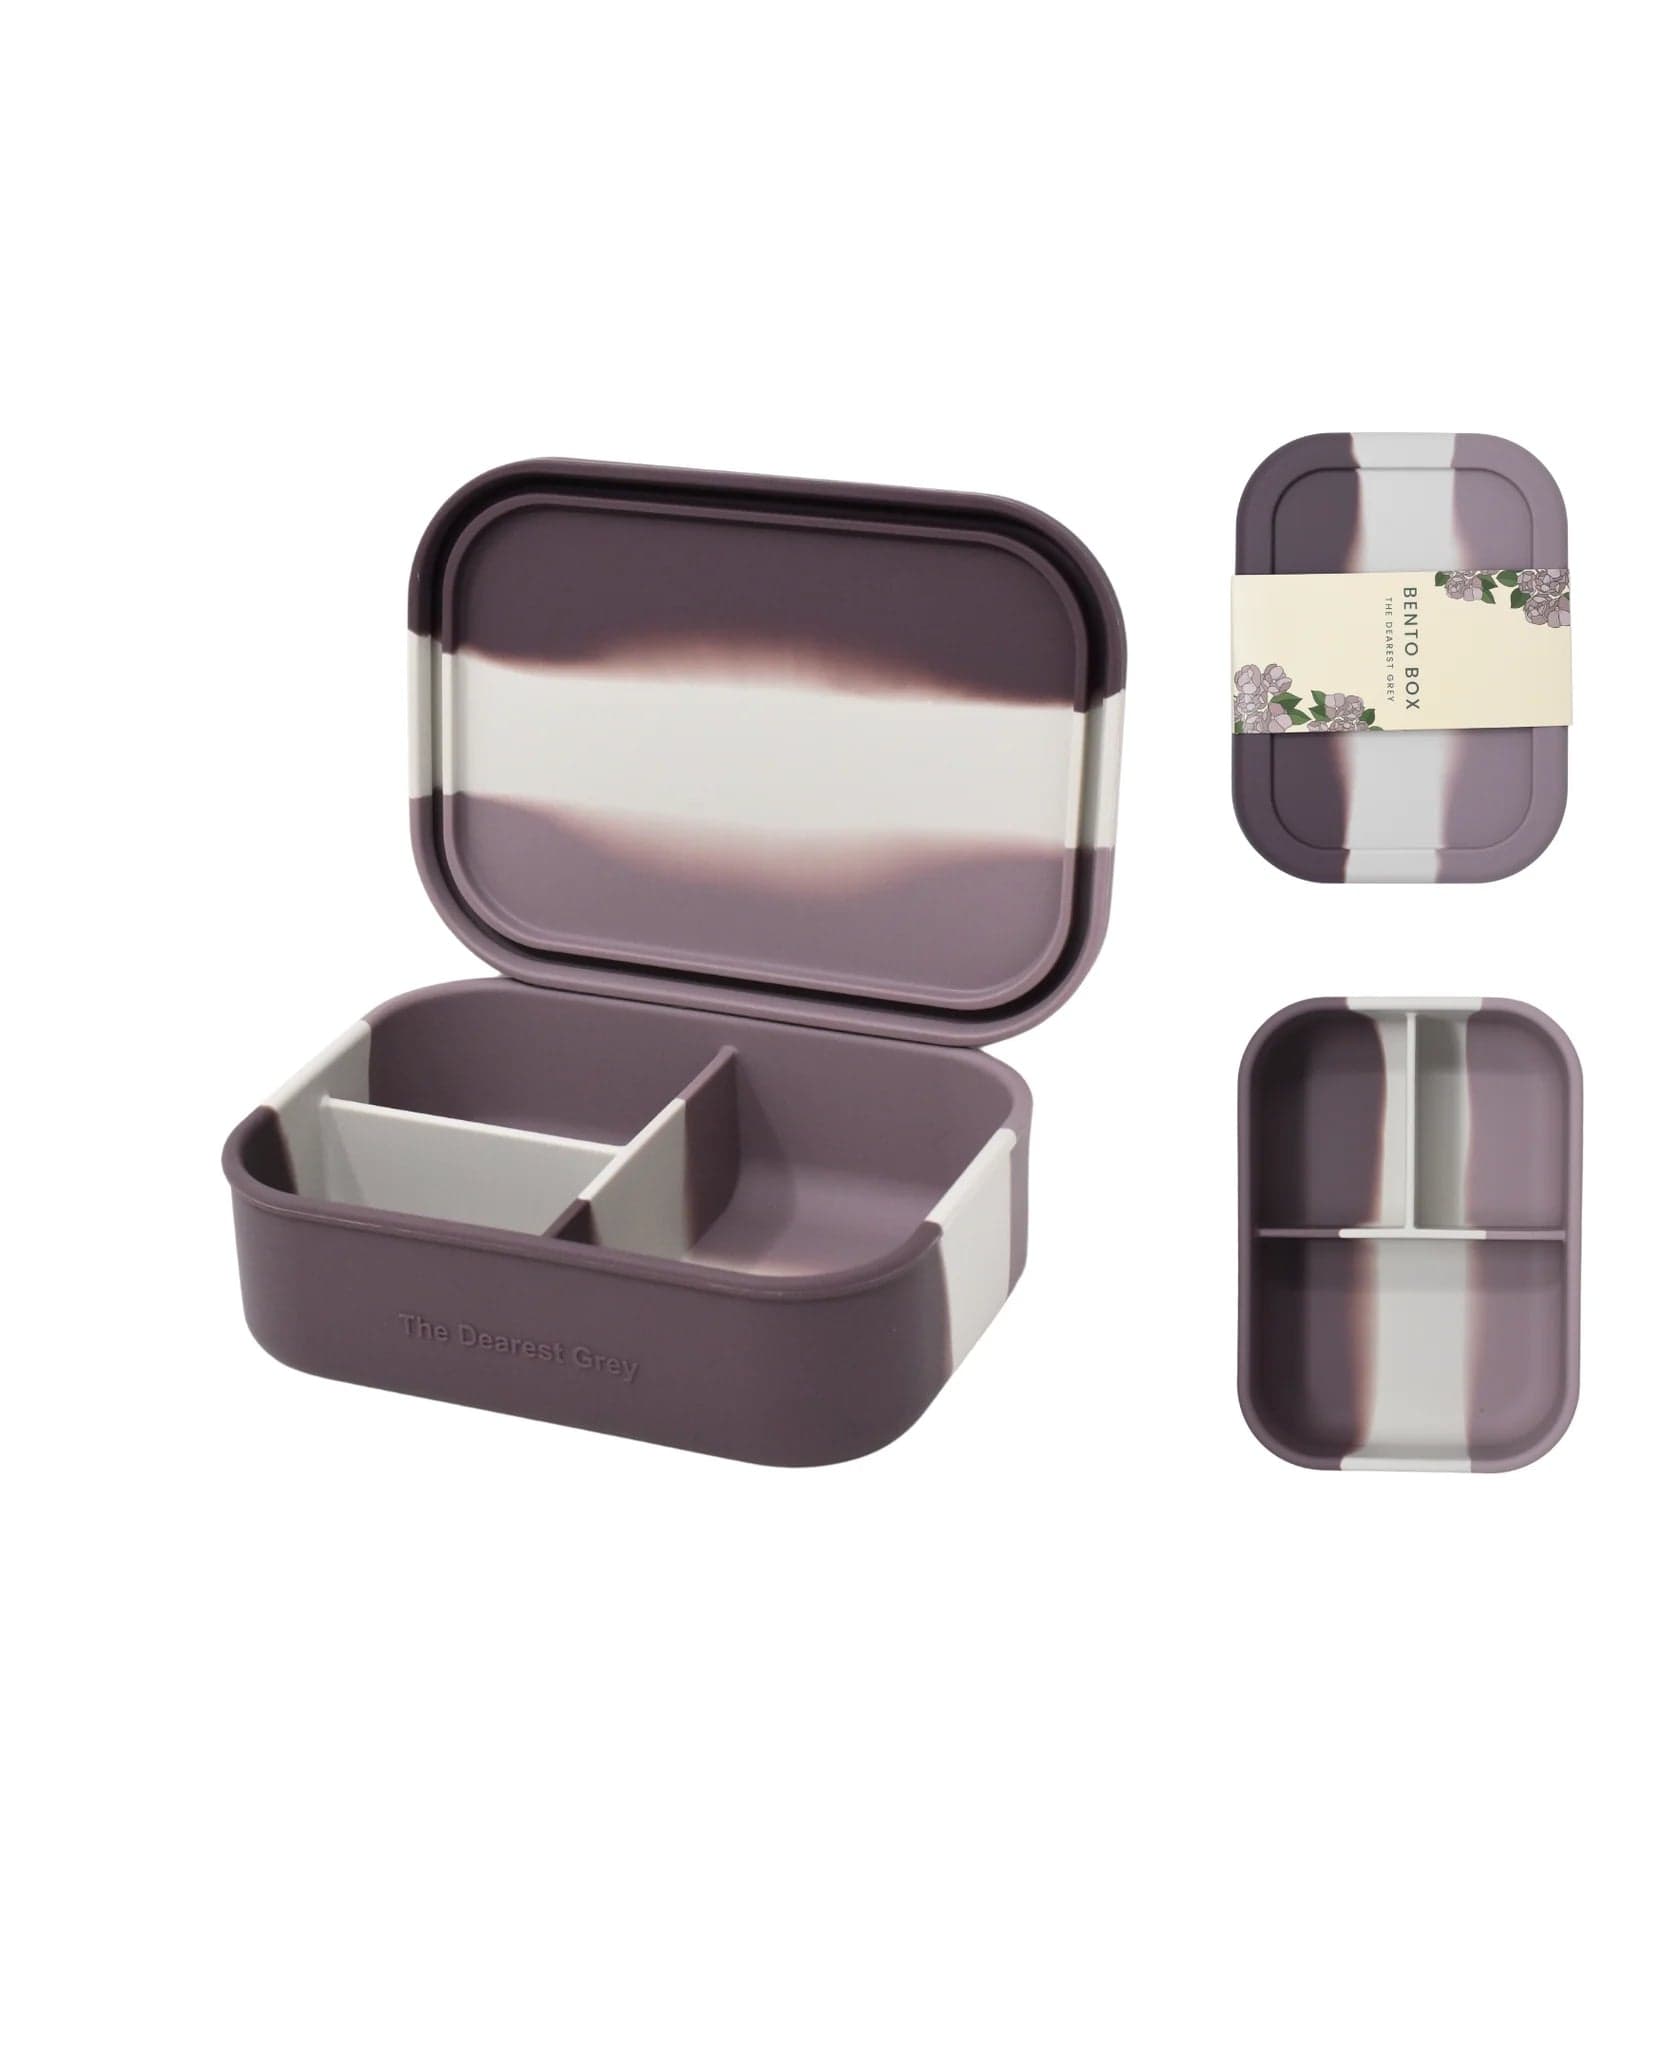 The Dearest Grey - Divided Silicone Bento Lunch Box